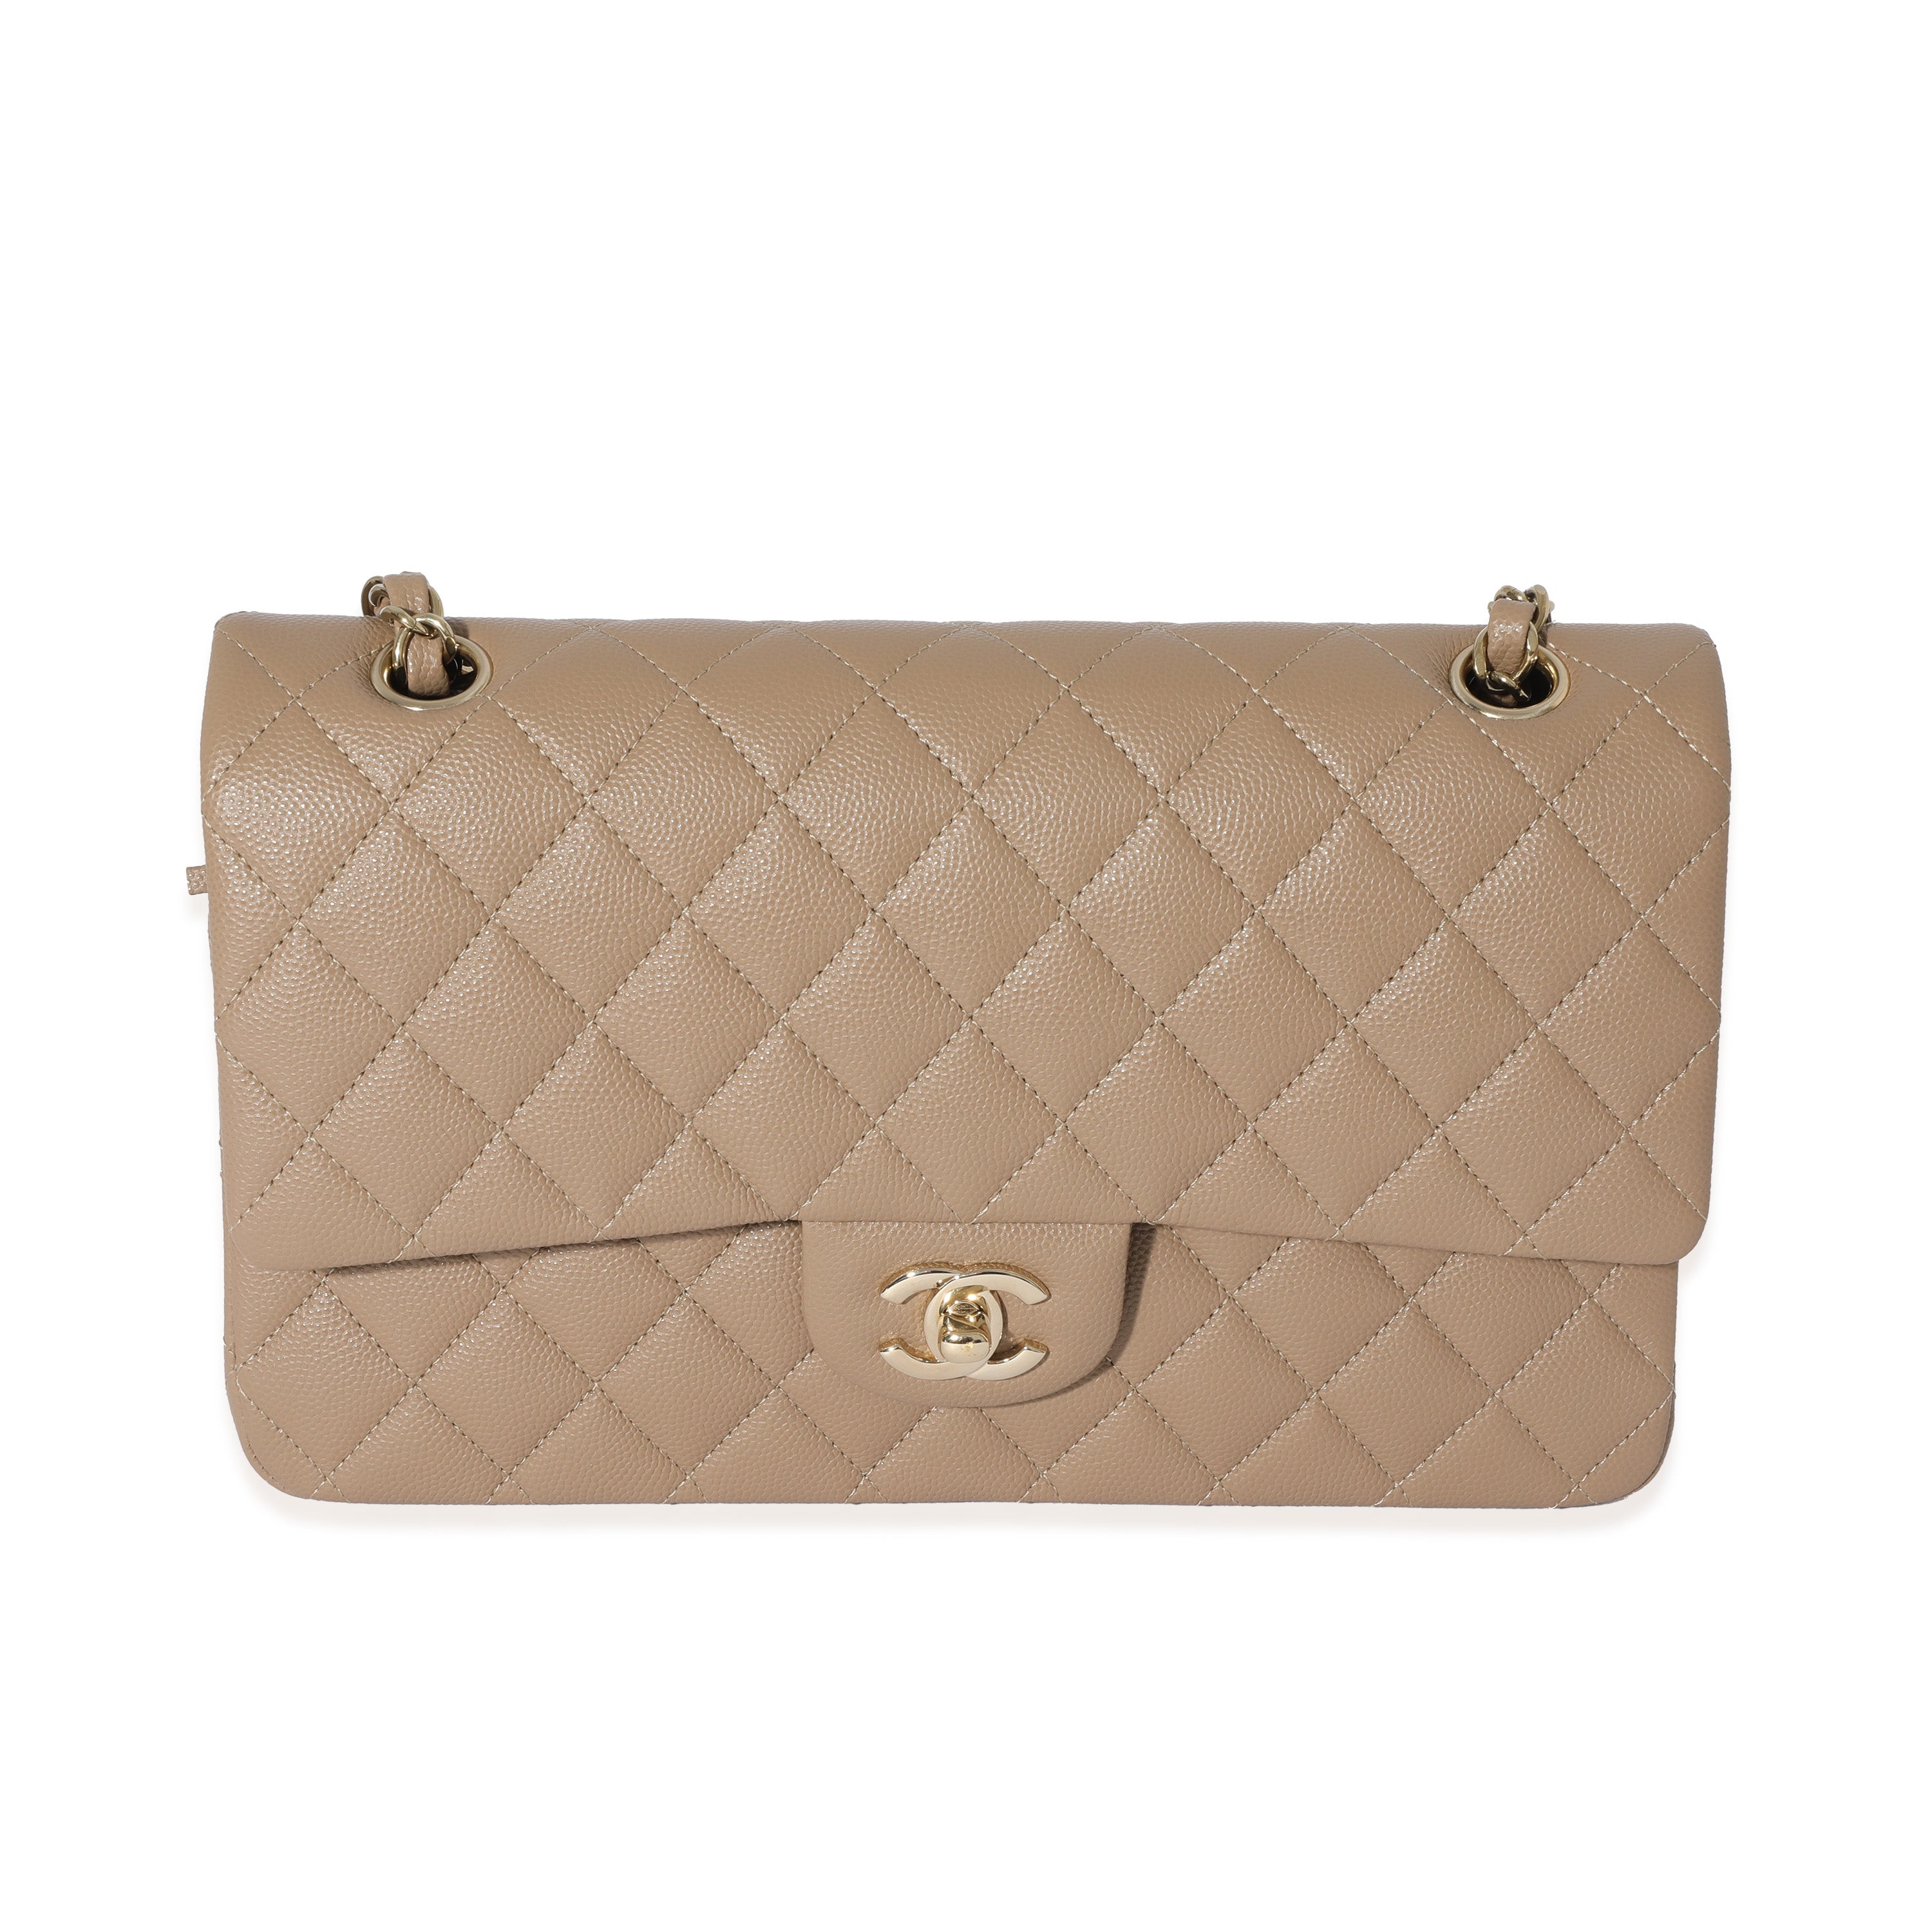 Chanel Pearl Crush Round Clutch with Chain in Coral Pink Lambskin